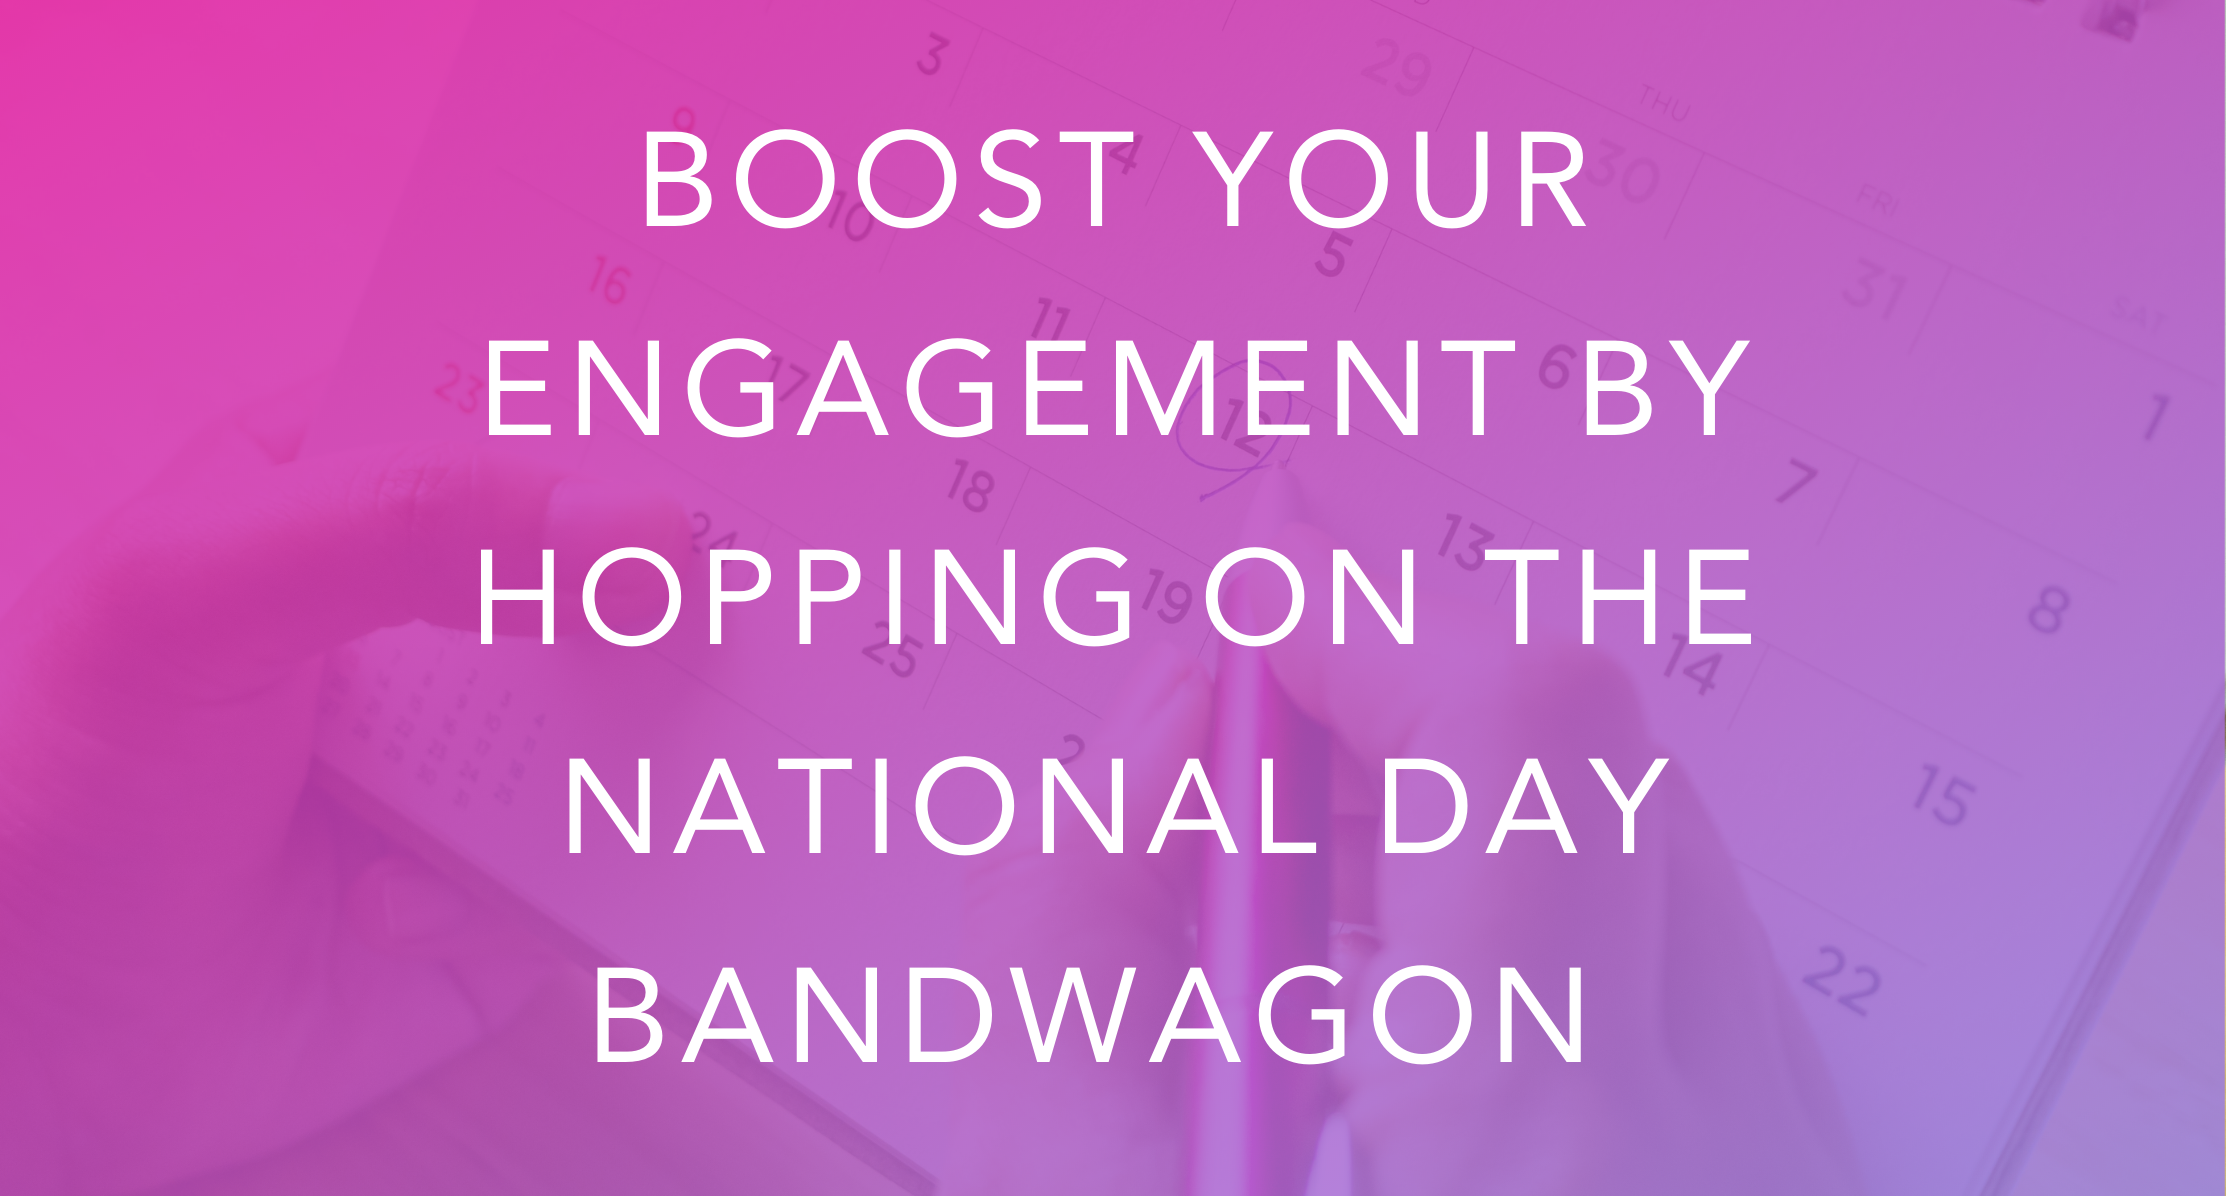 Boost Your Engagement By Hopping on the National Day Bandwagon